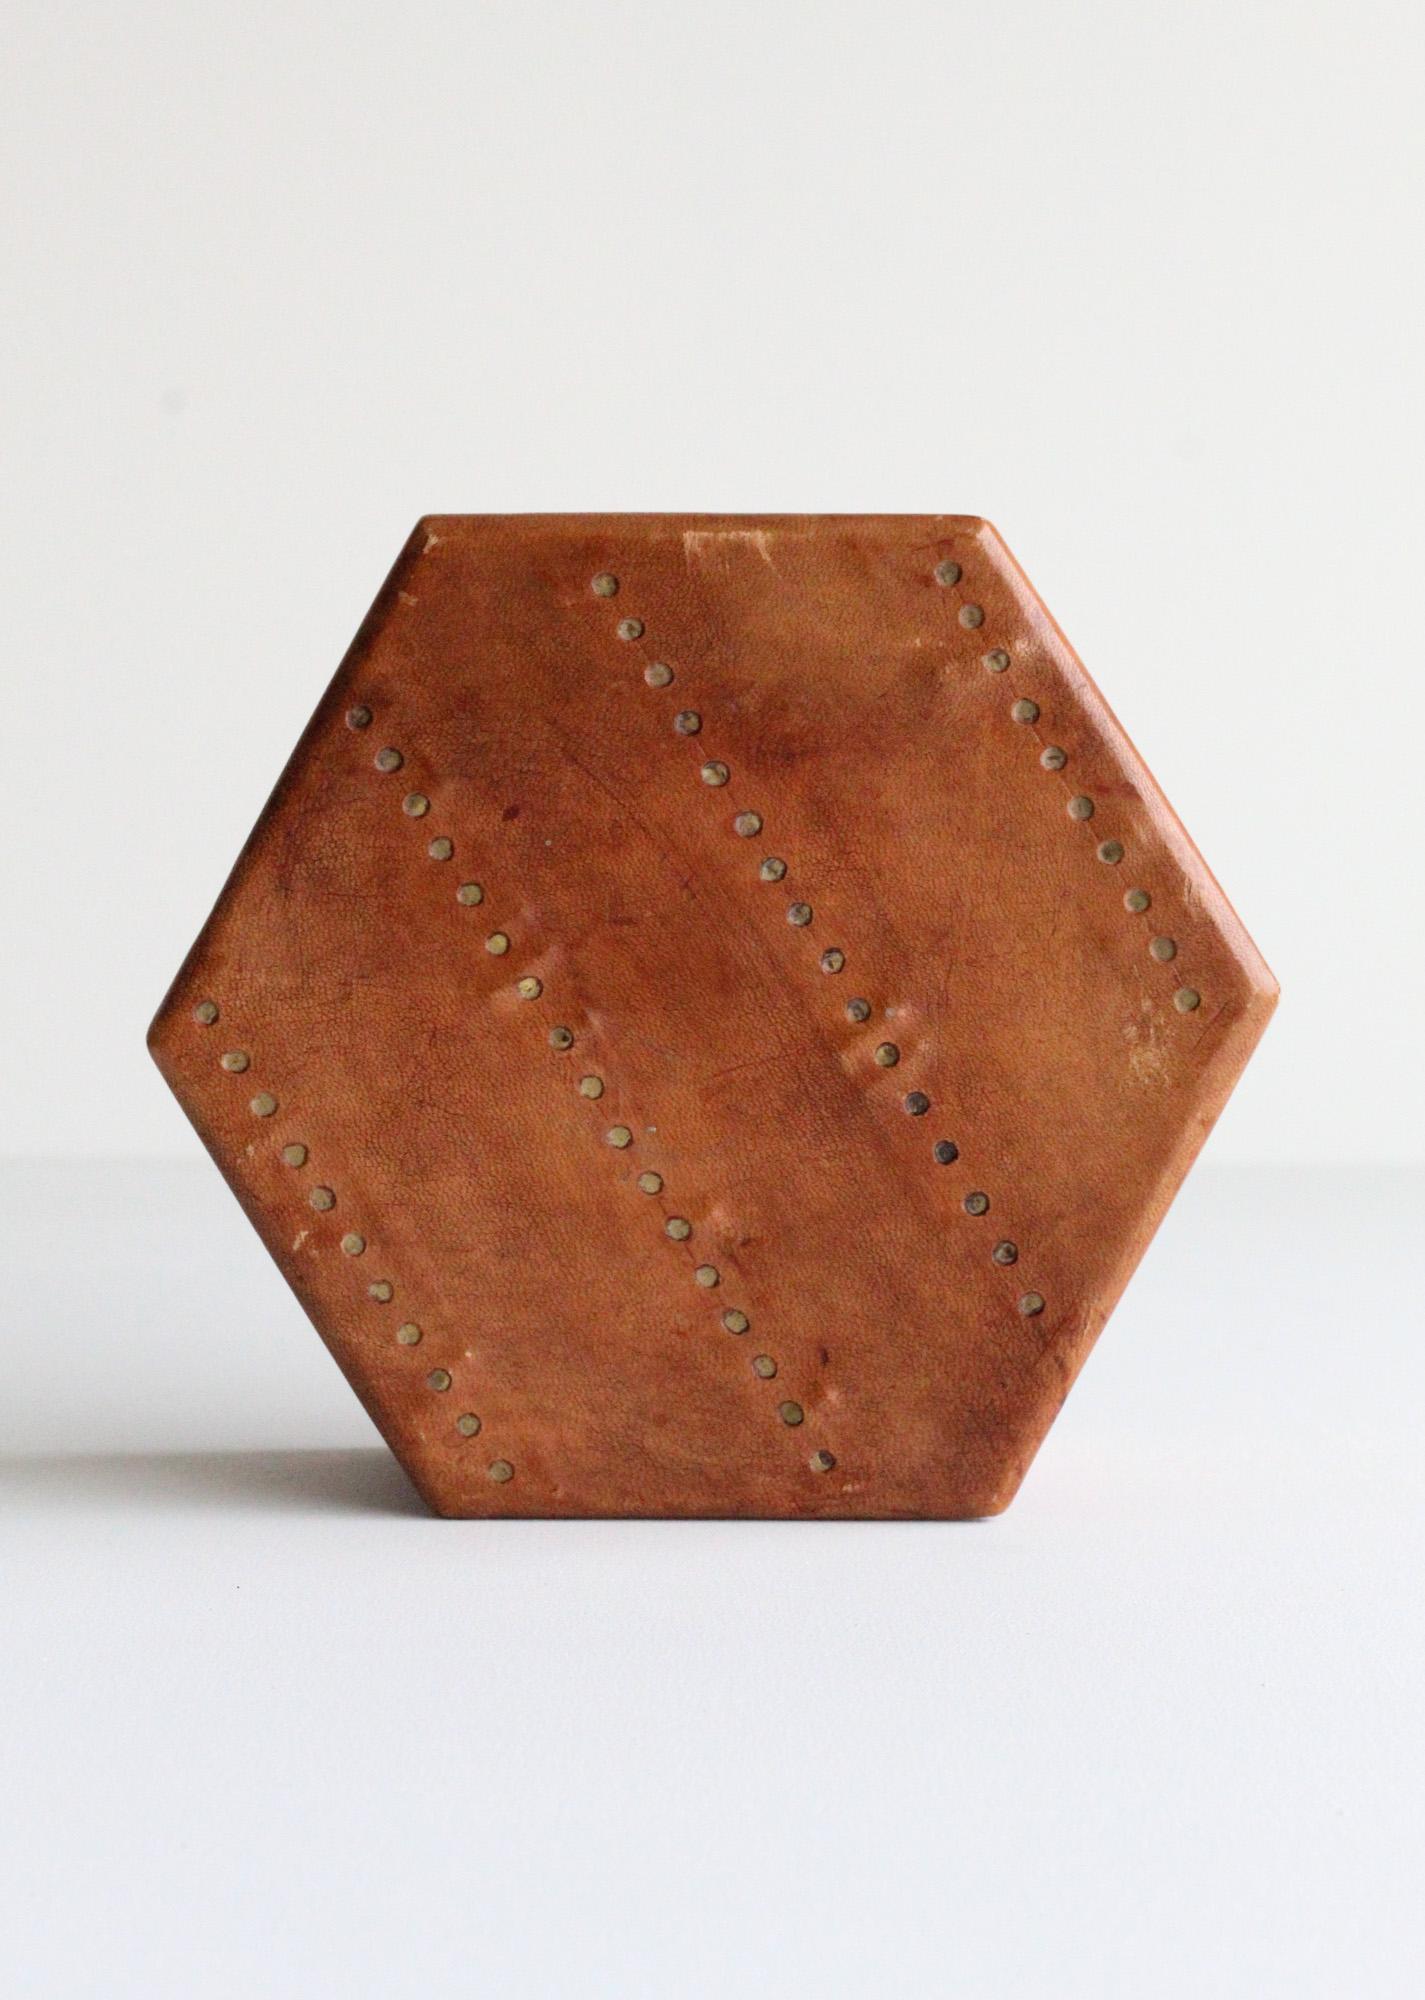 Meticulousy crafted hexagon saddle leather box with brass. Box has great patina and craftsmanship, missing a small top hinge as pictured which is an easy repair by adding or removing bottom hinge and leaving as a lidded box with vintage back hinge